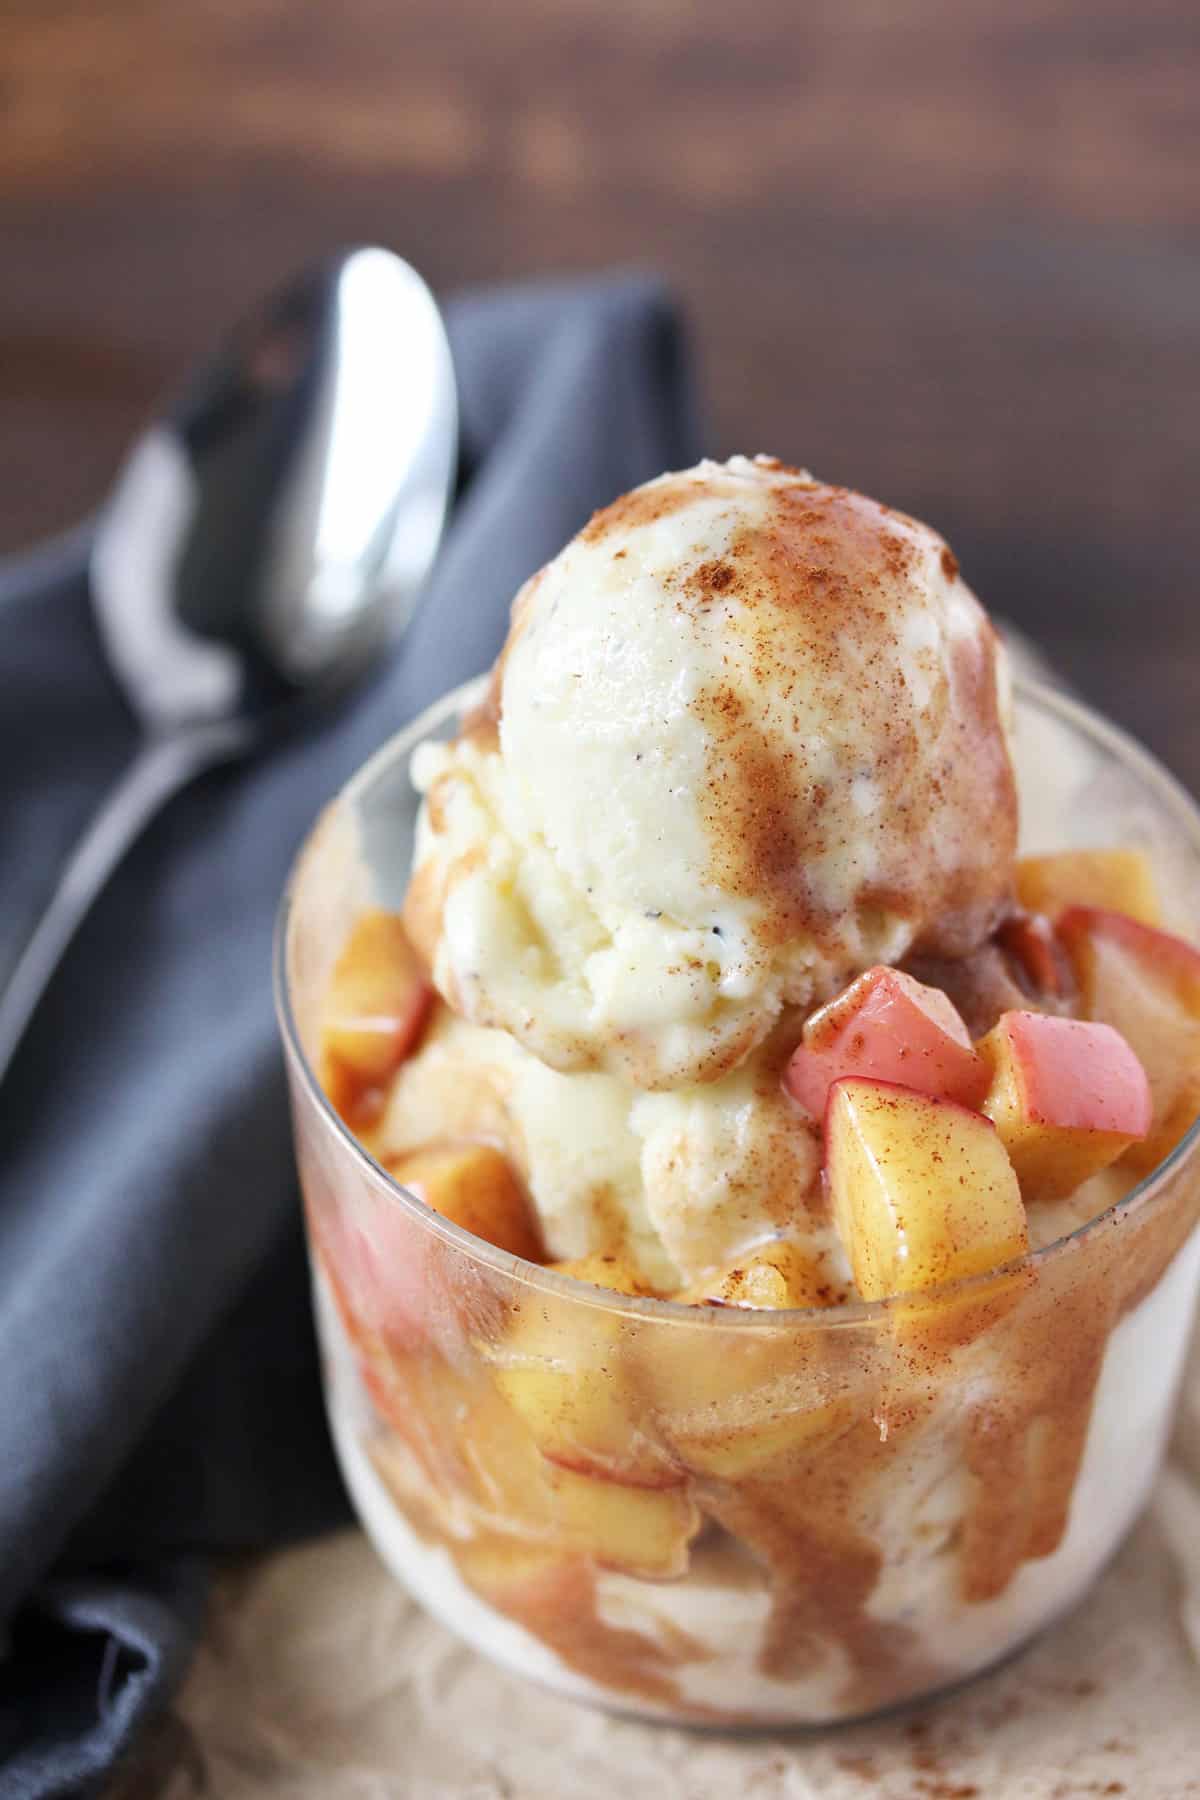 Vanilla ice cream with cinnamon apple topping in a clear glass on grey napkin.